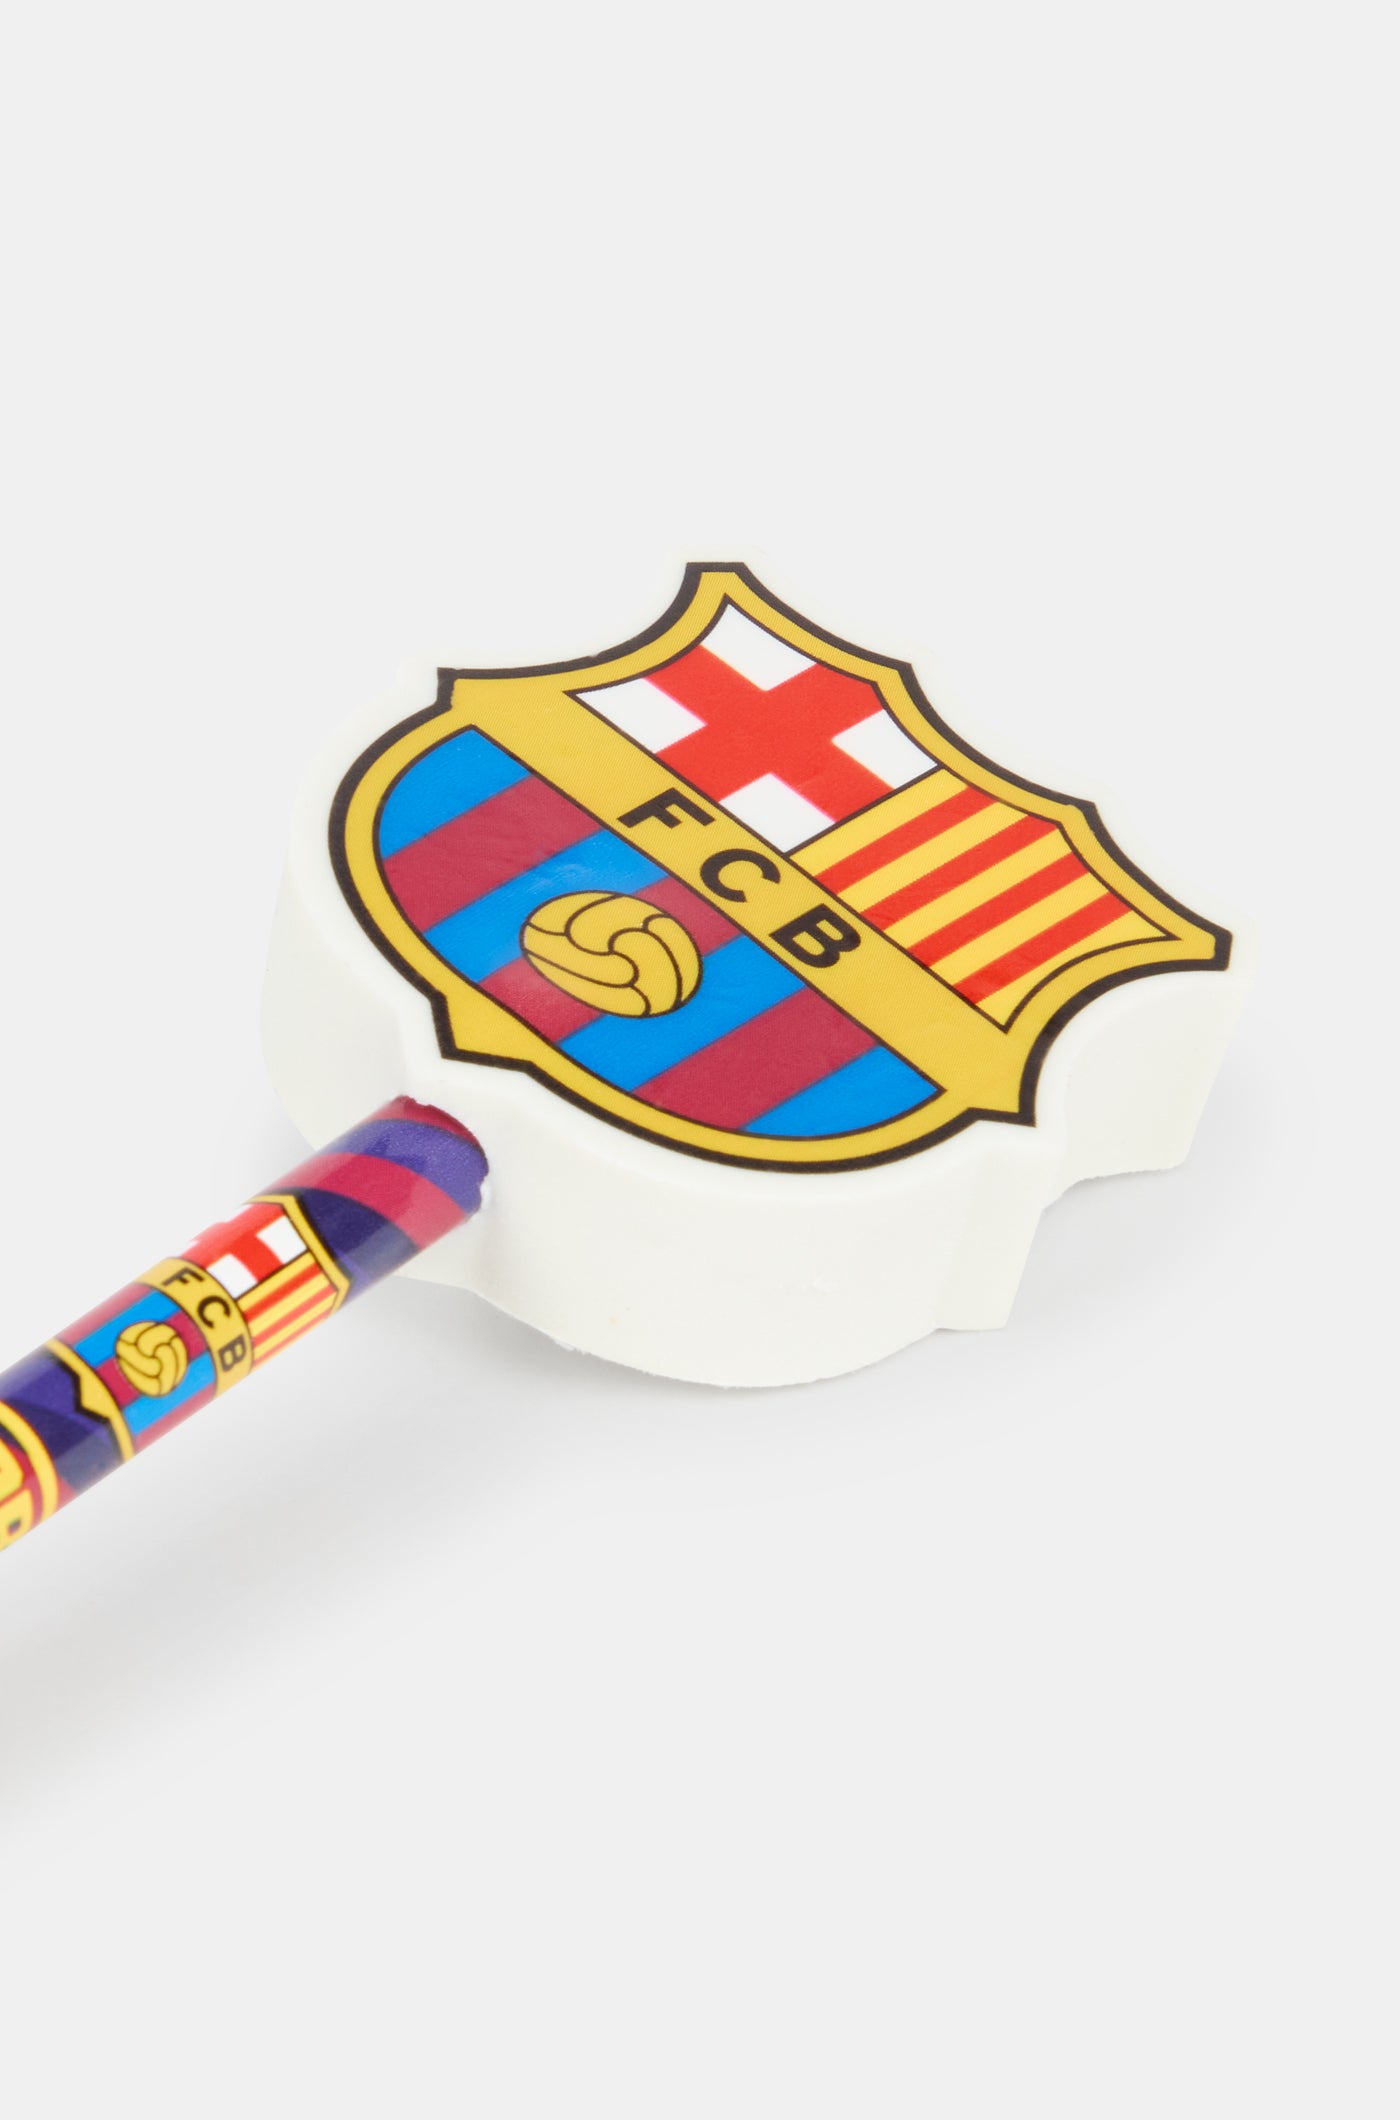 FC Barcelona Pencil with Decorated Eraser Topper